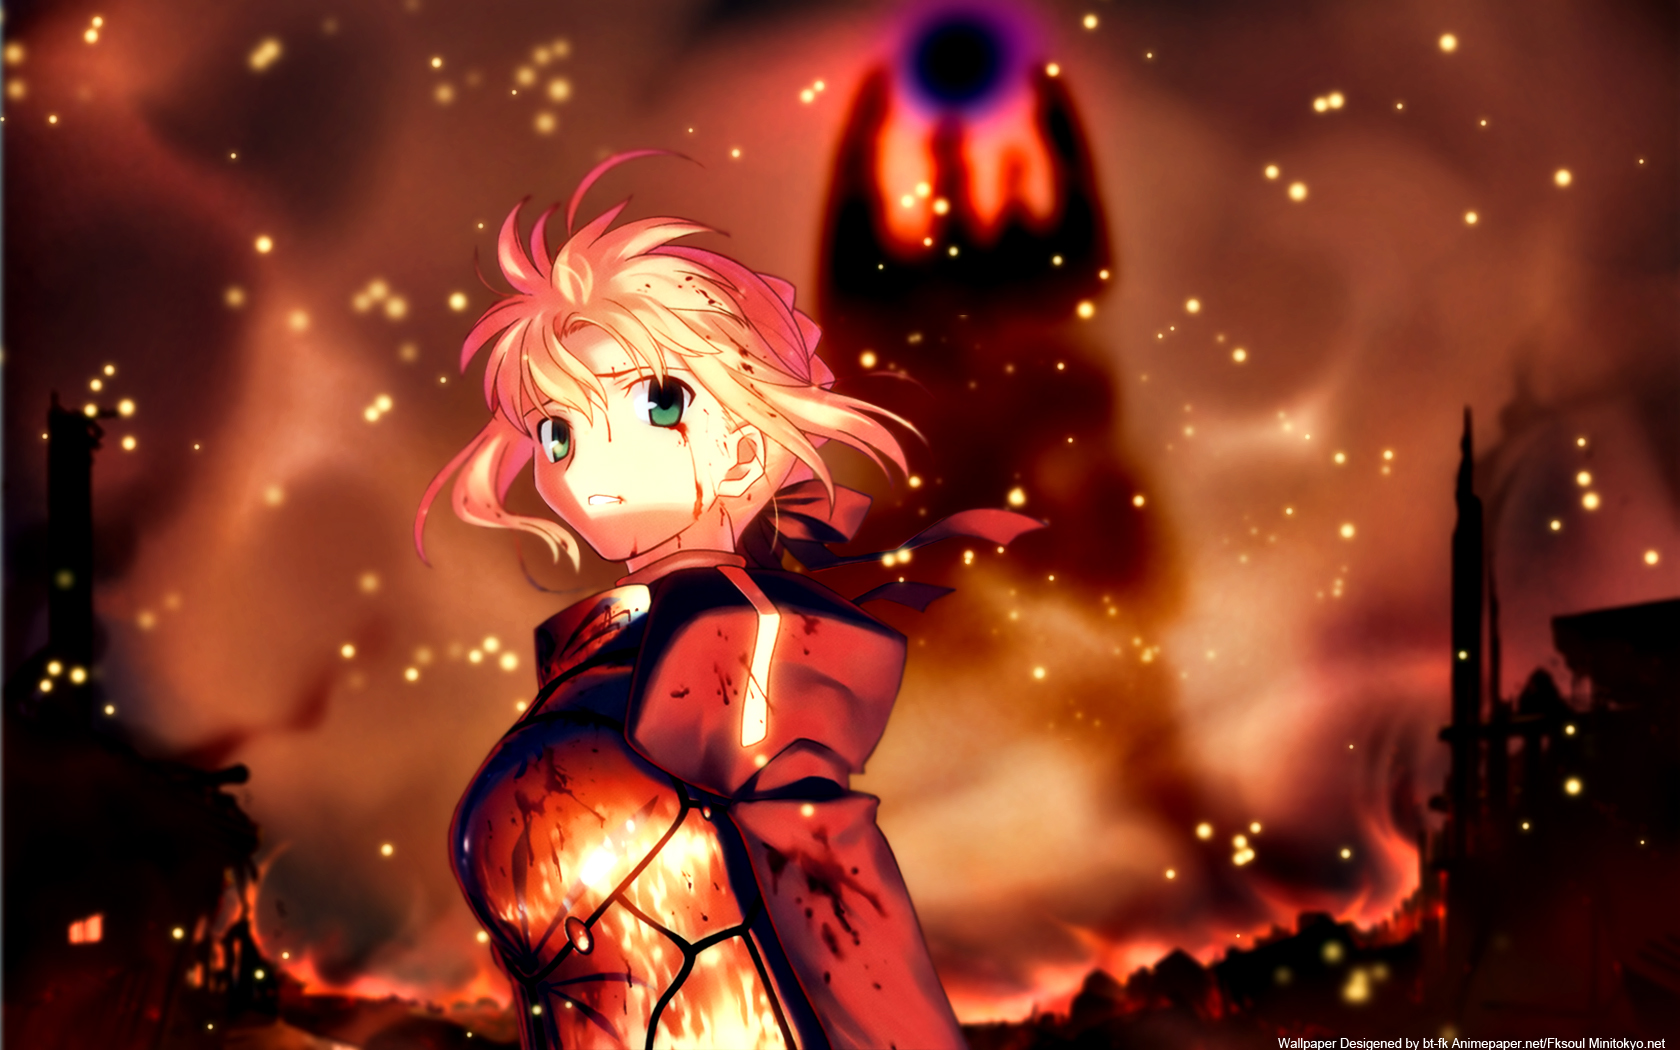 7. Saber (Fate/stay night) - wide 1